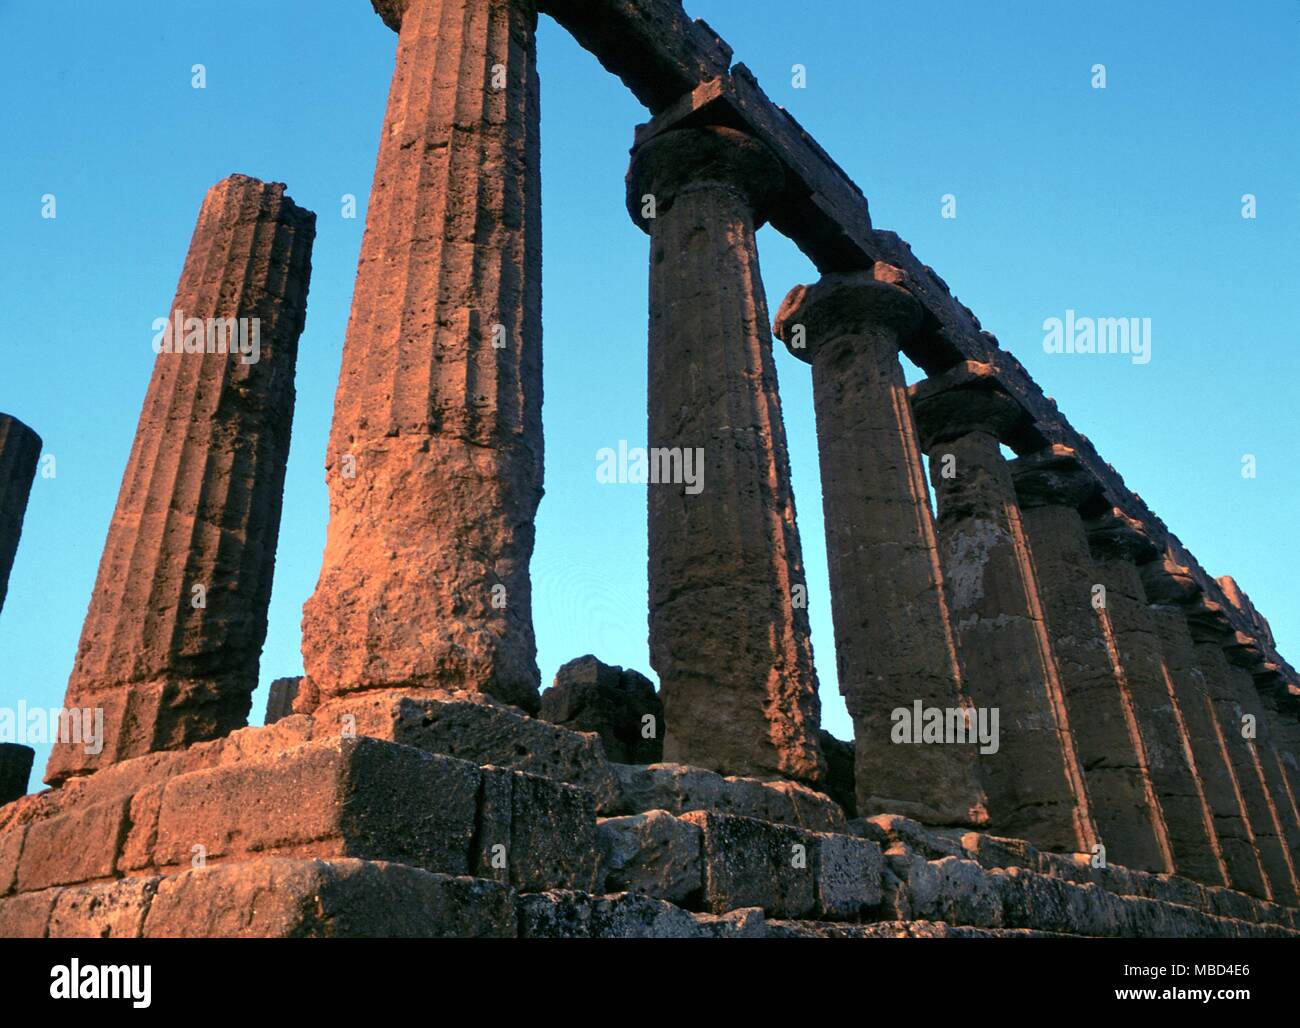 Greek Mythology. Temple of Juno. The Temple of Hera Lacinia, or Juno, at Agrigento, Sicily, built circa 440 BC. The shot has been taken to show how the first rays of sunrise (in August) strike the east end of the temple. Stock Photo